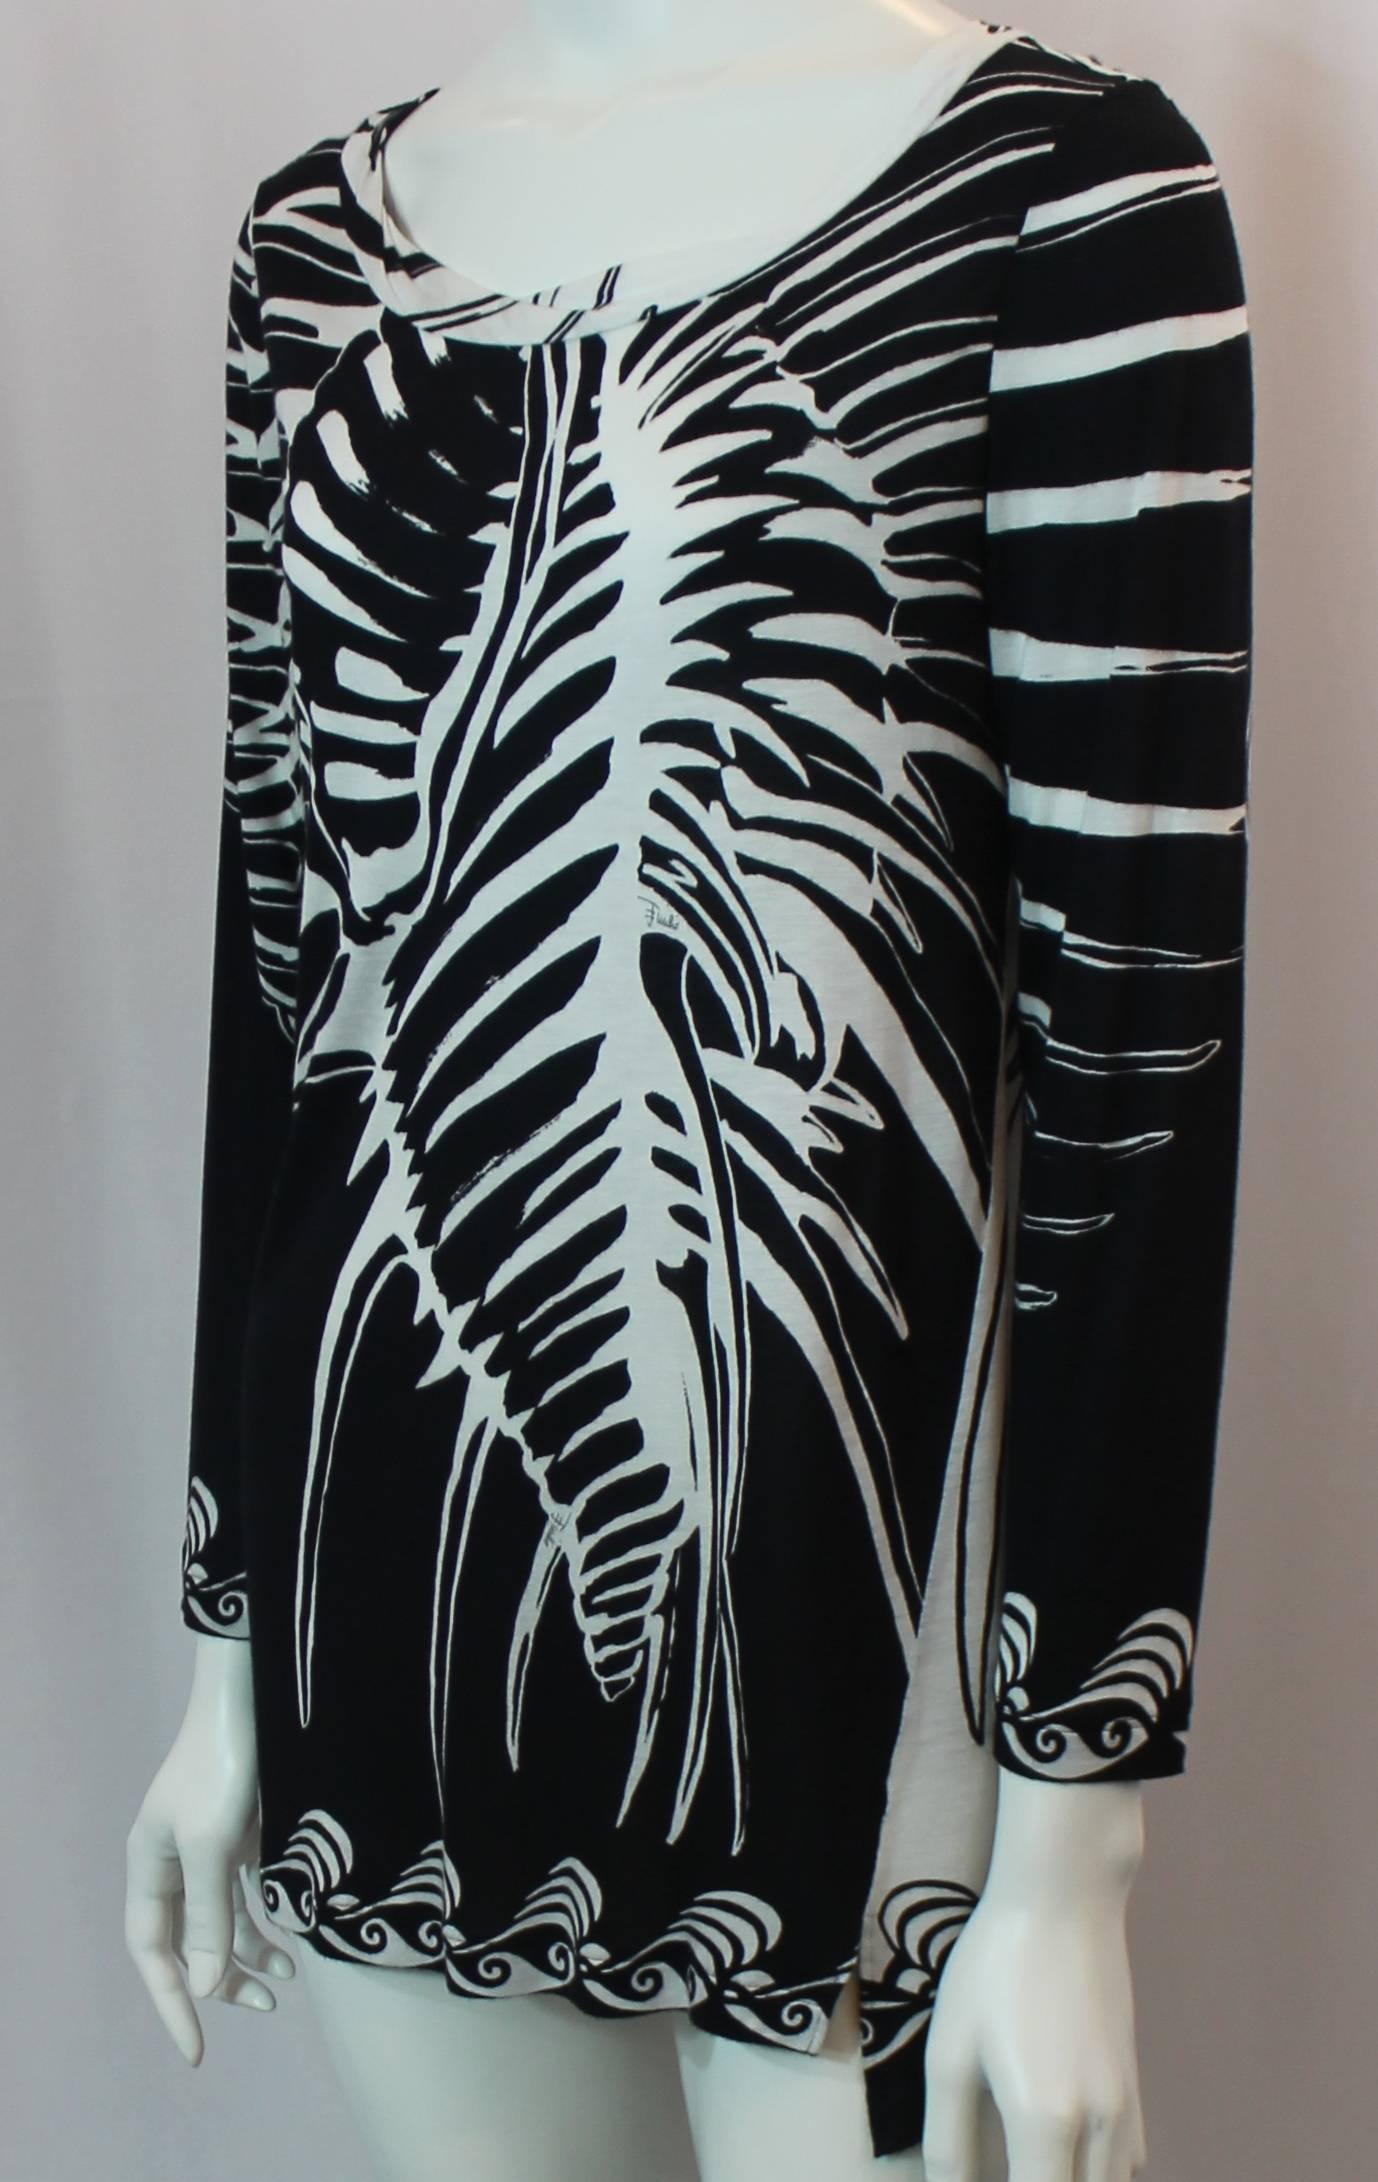 Emilio Pucci Black and White Printed Cotton Tunic Top - M. This light weight cotton tunic top has a scoop neck, a slit on one side of the bottom, and a black and white large conch and tropical print. It is in excellent condition with light general